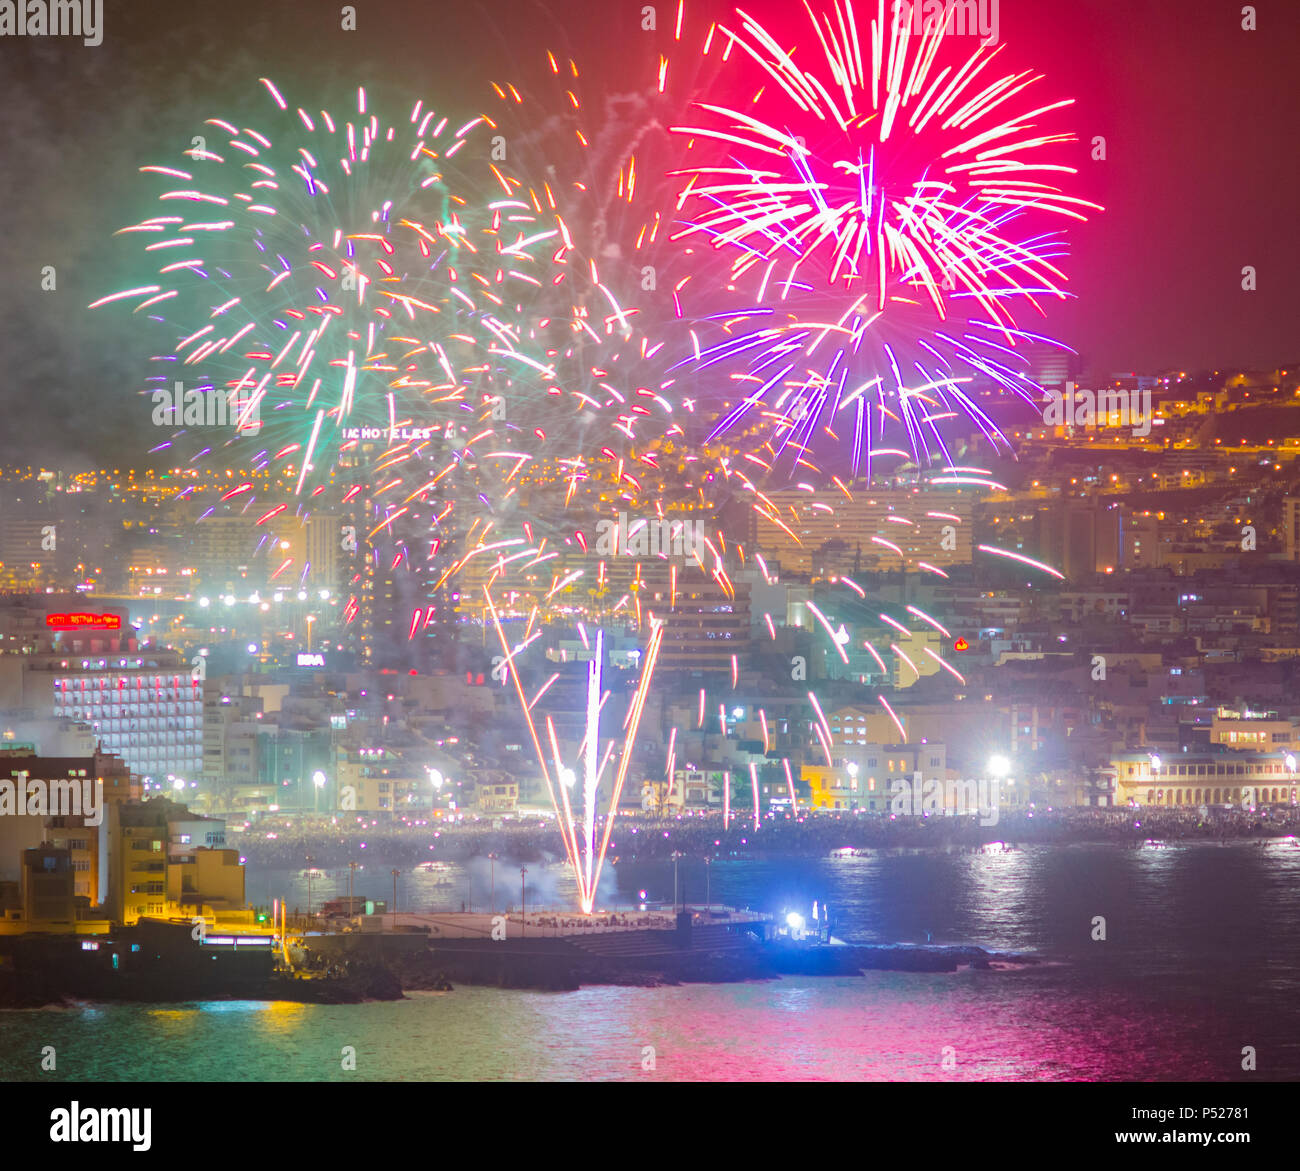 Las Palmas, Gran Canaria, Canary Islands, Spain 24th June, 2018. More than  a 100,000 people gather on the city beach to watch the midnight San Juan  fiesta fireworks display in Las Palmas,